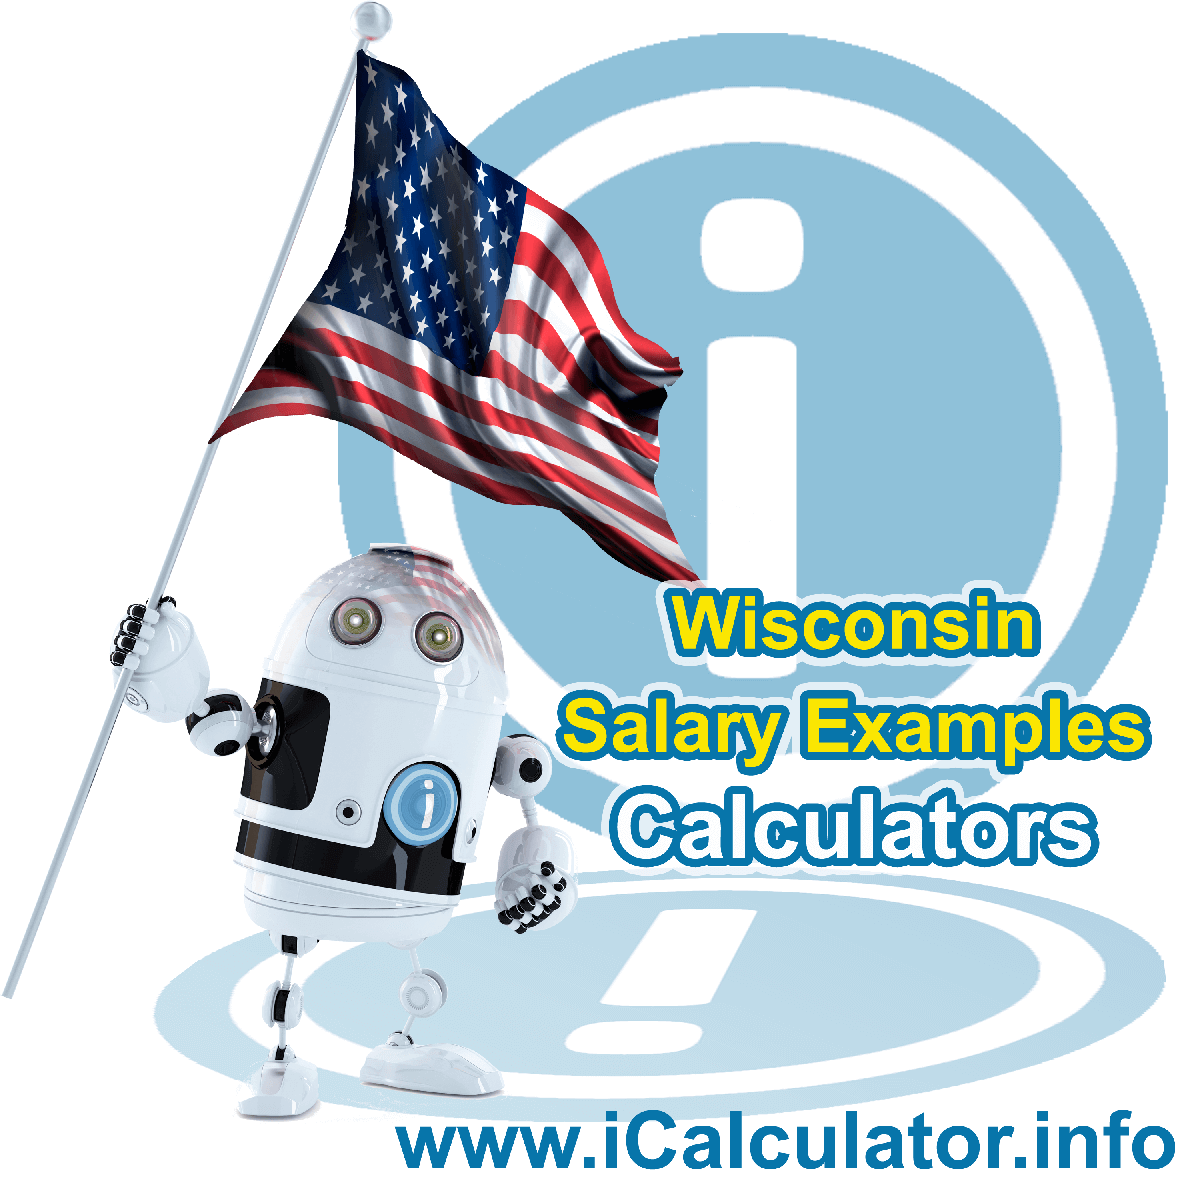 Wisconsin Salary Example for $ 260,000.00 in 2023 | iCalculator™ | $ 260,000.00 salary example for employee and employer paying Wisconsin State tincome taxes. Detailed salary after tax calculation including Wisconsin State Tax, Federal State Tax, Medicare Deductions, Social Security, Capital Gains and other income tax and salary deductions complete with supporting Wisconsin state tax tables 